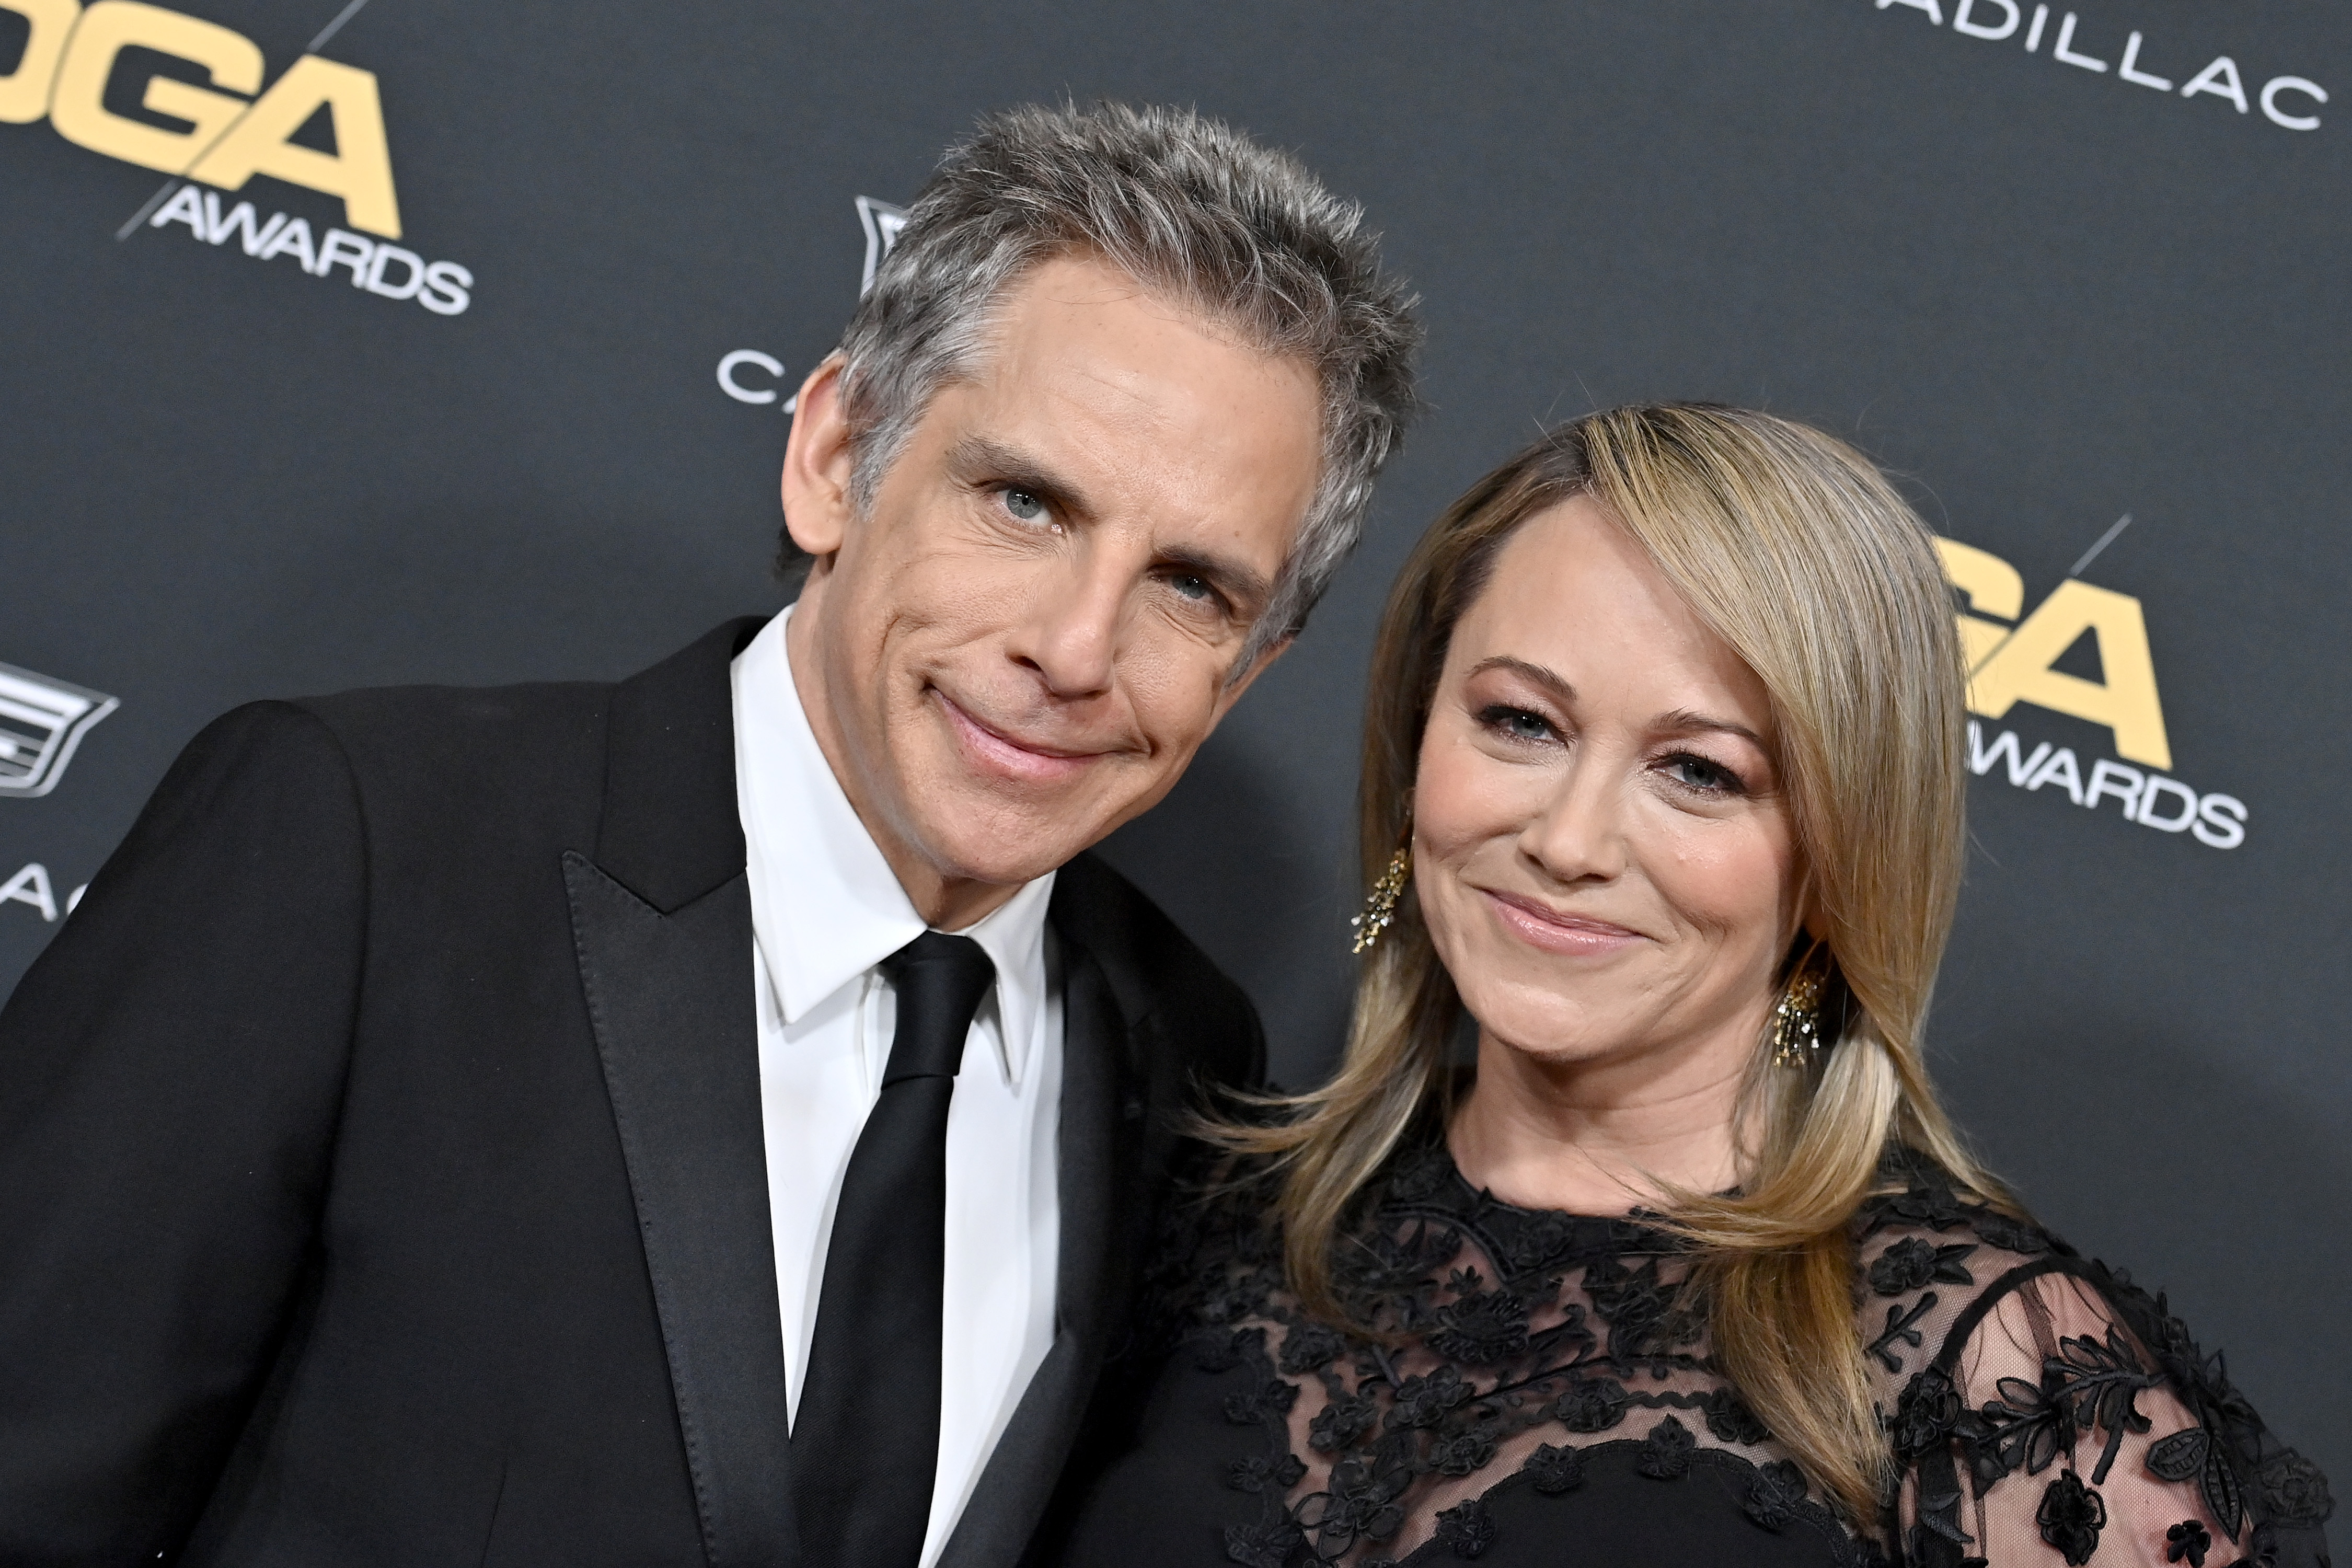 Ben Stiller and Christine Taylor in Beverly Hills, California on February 18, 2023 | Source: Getty Images